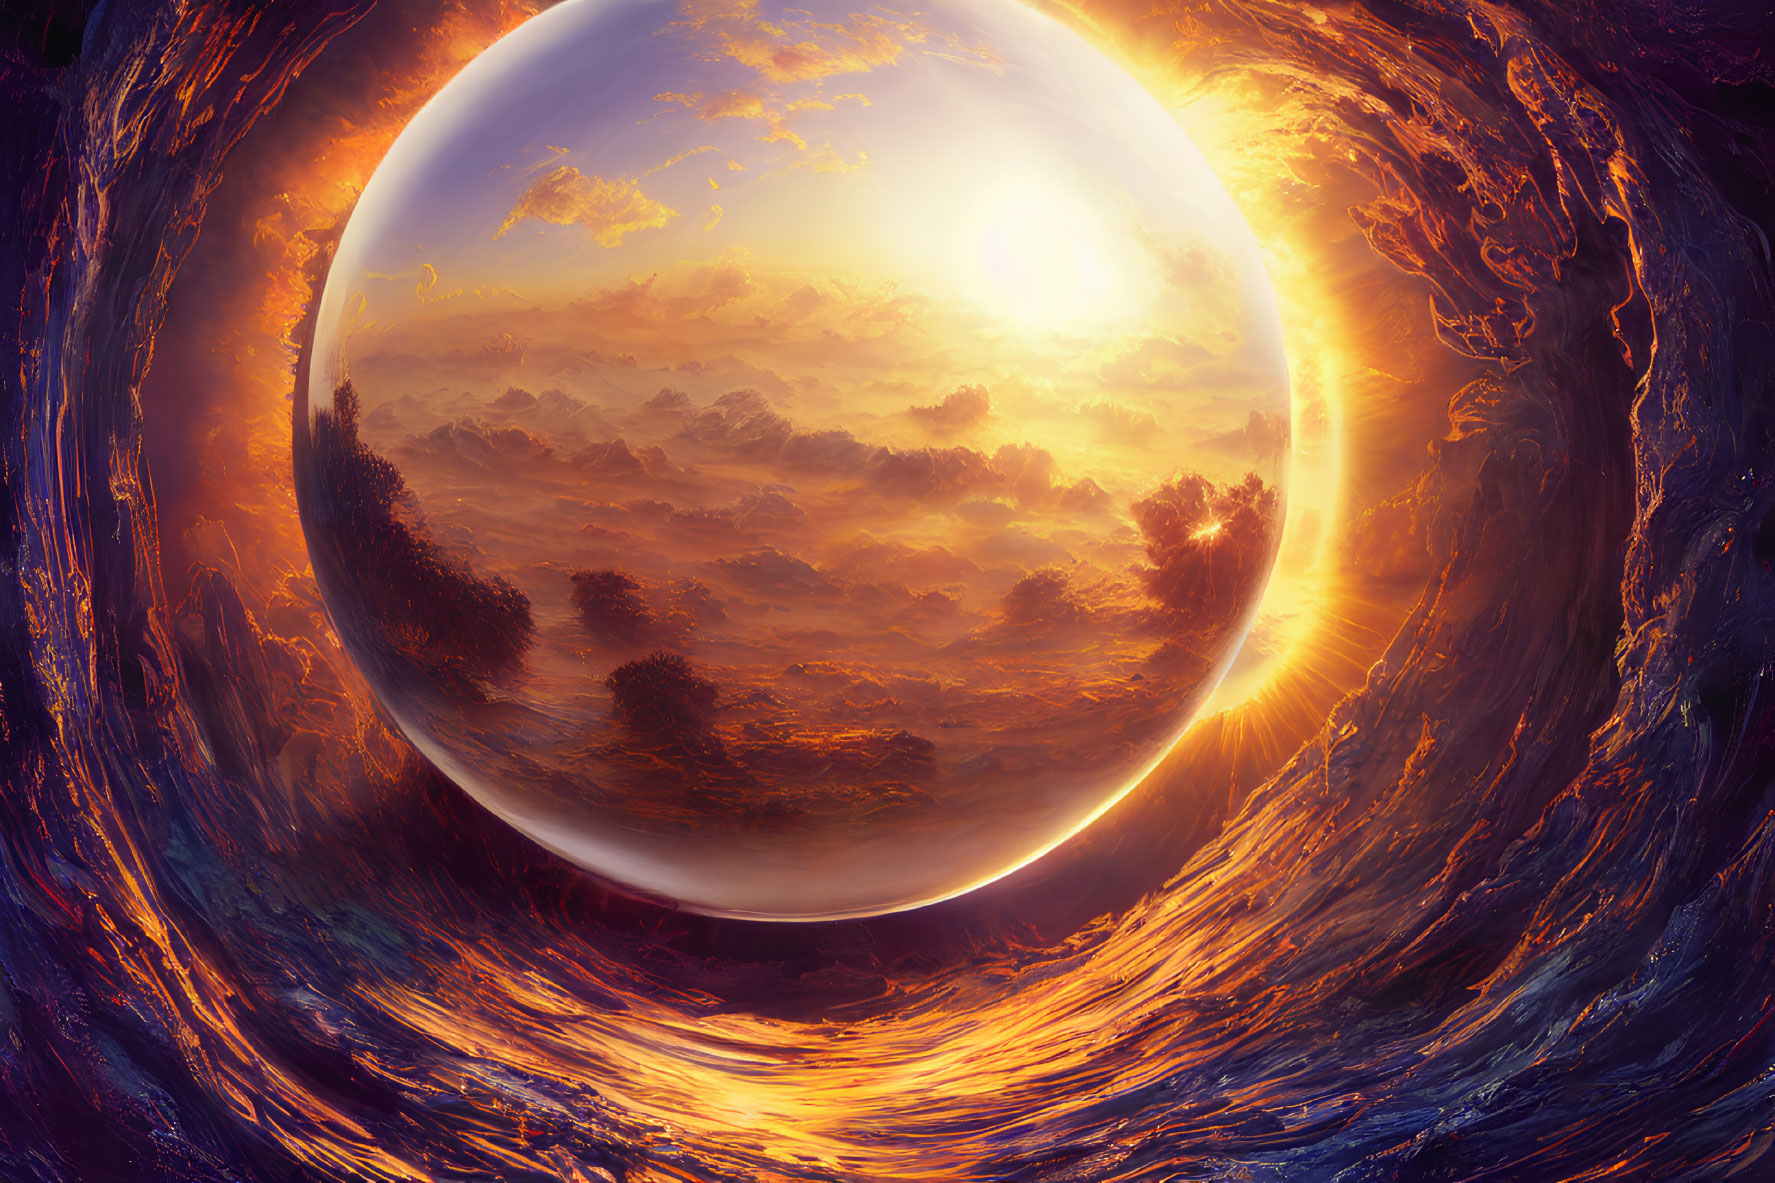 Surreal landscape with luminous orb and fiery sky swirls